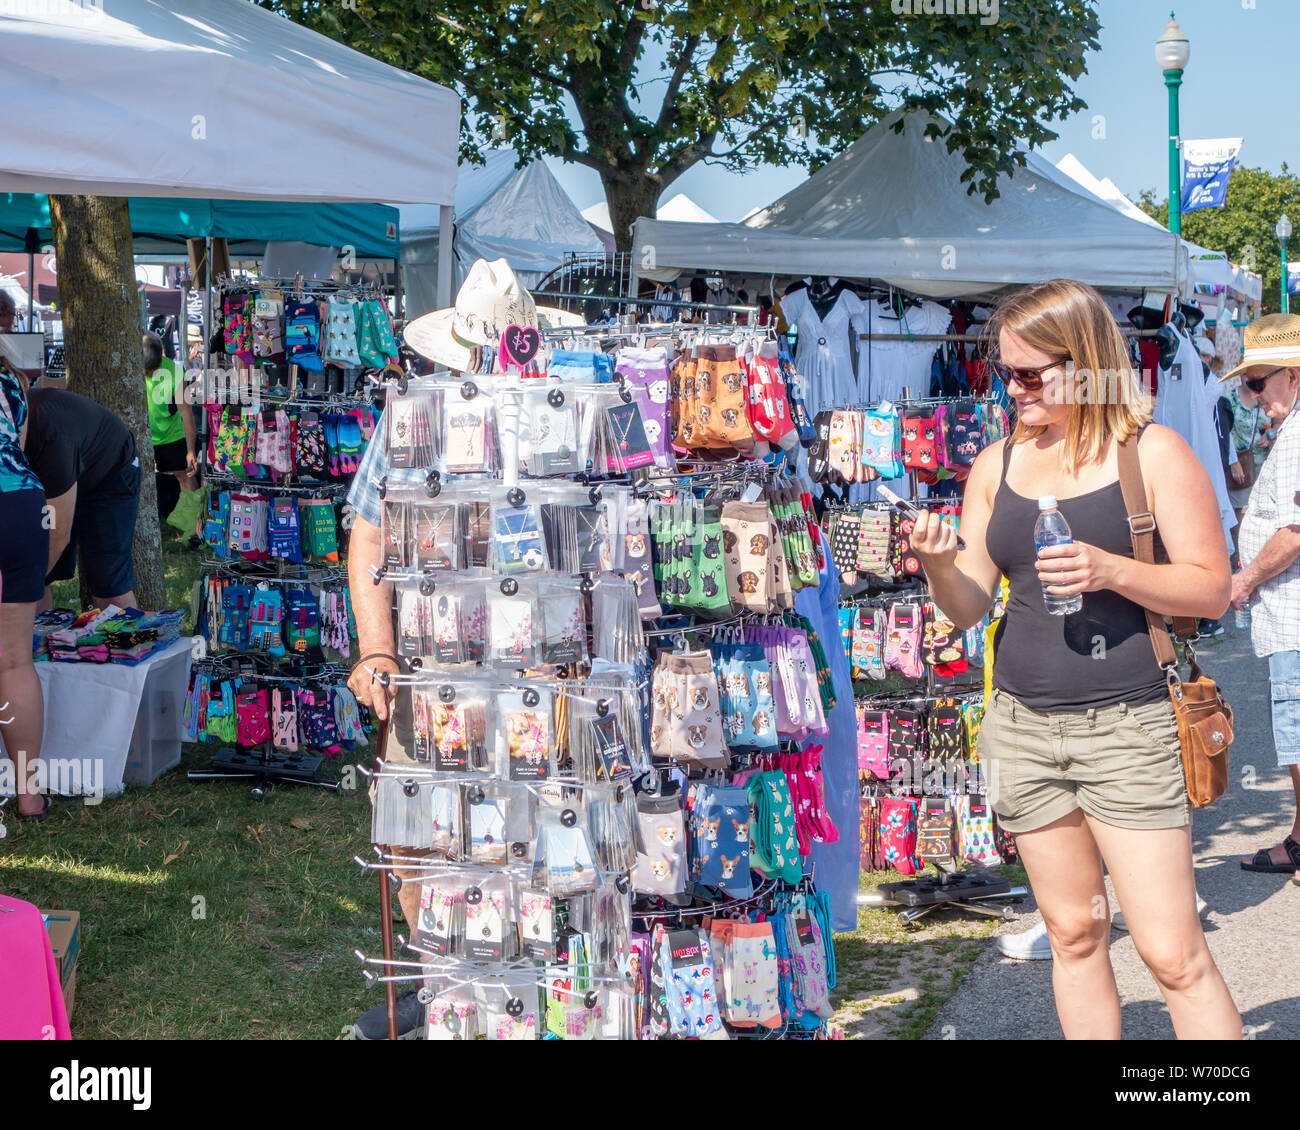 Shoppers check out the offerings at a vendor booth at Kempenfest in Barrie Ontario Canada. Stock Photo